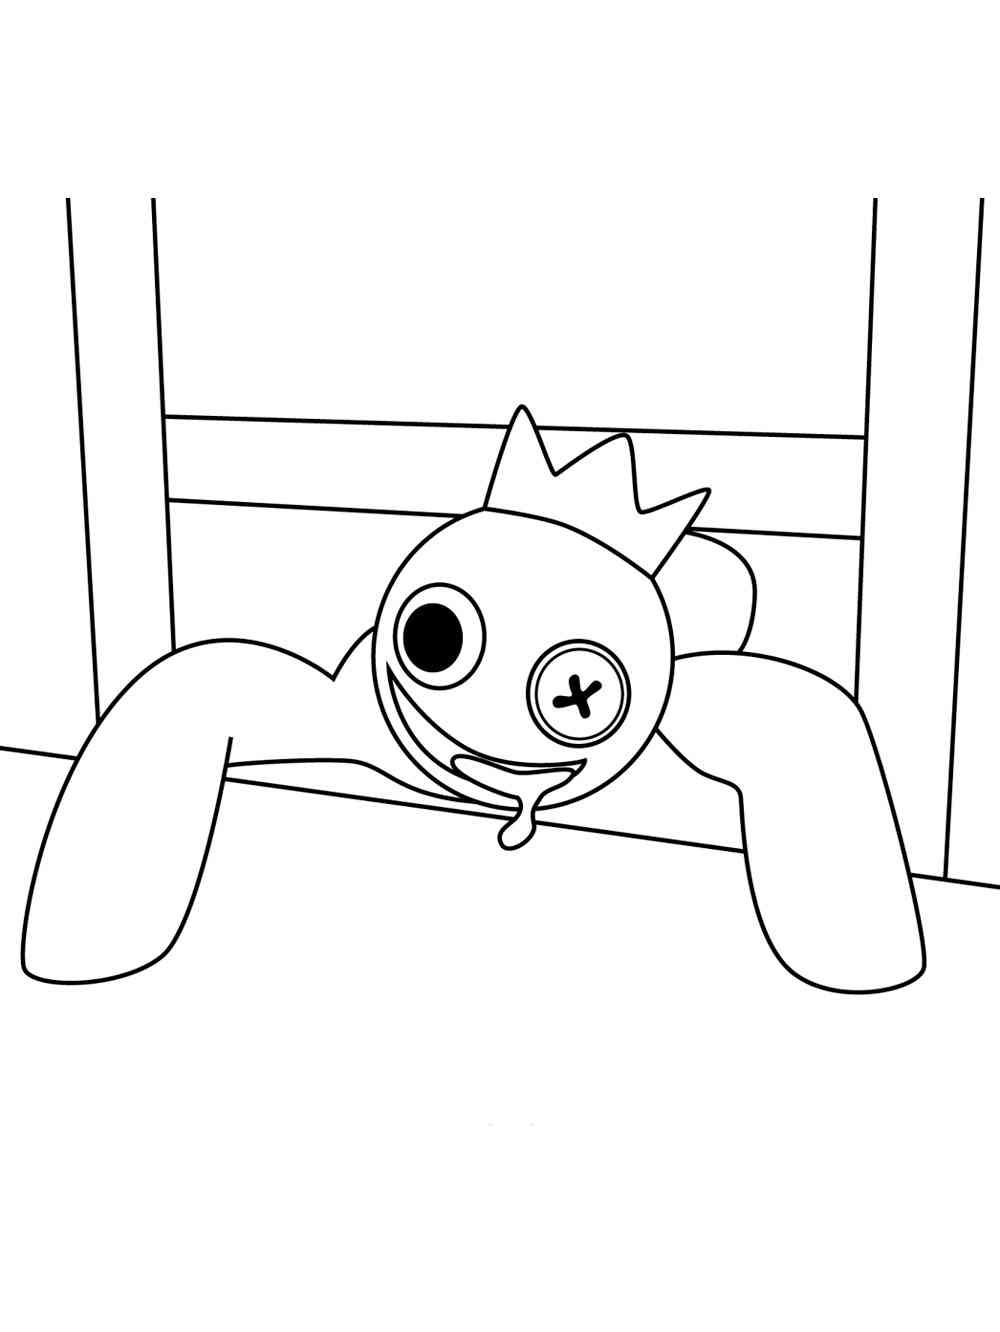 Singing Rainbow Friends Roblox coloring page